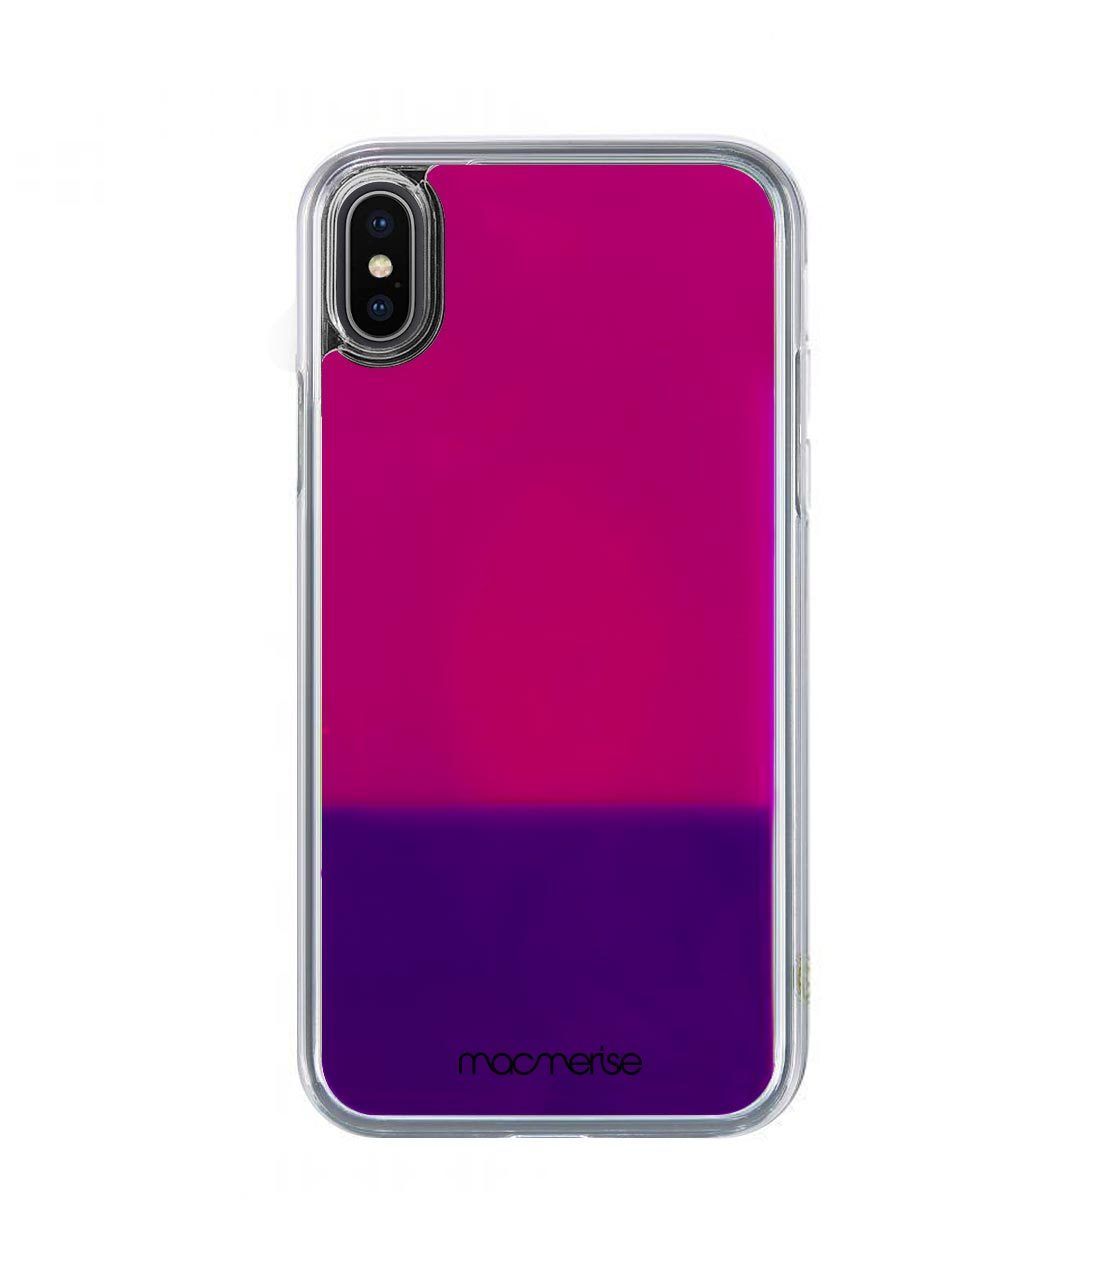 Neon Sand Purple Pink - Neon Sand Phone Case for iPhone X